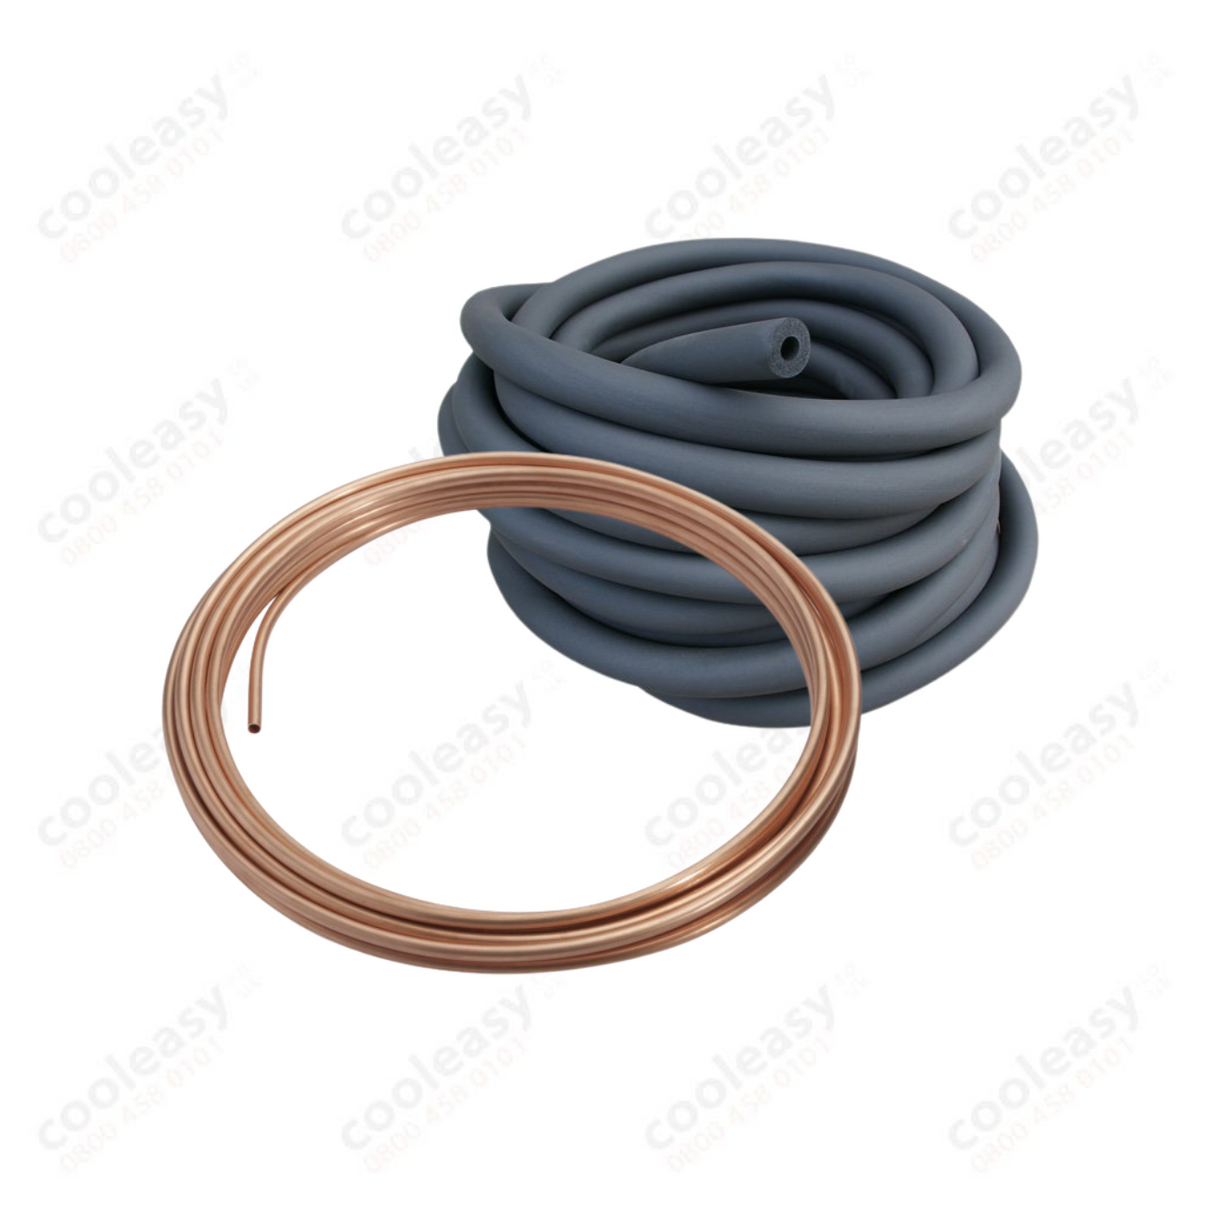 Copper Pipe and Lagging Set